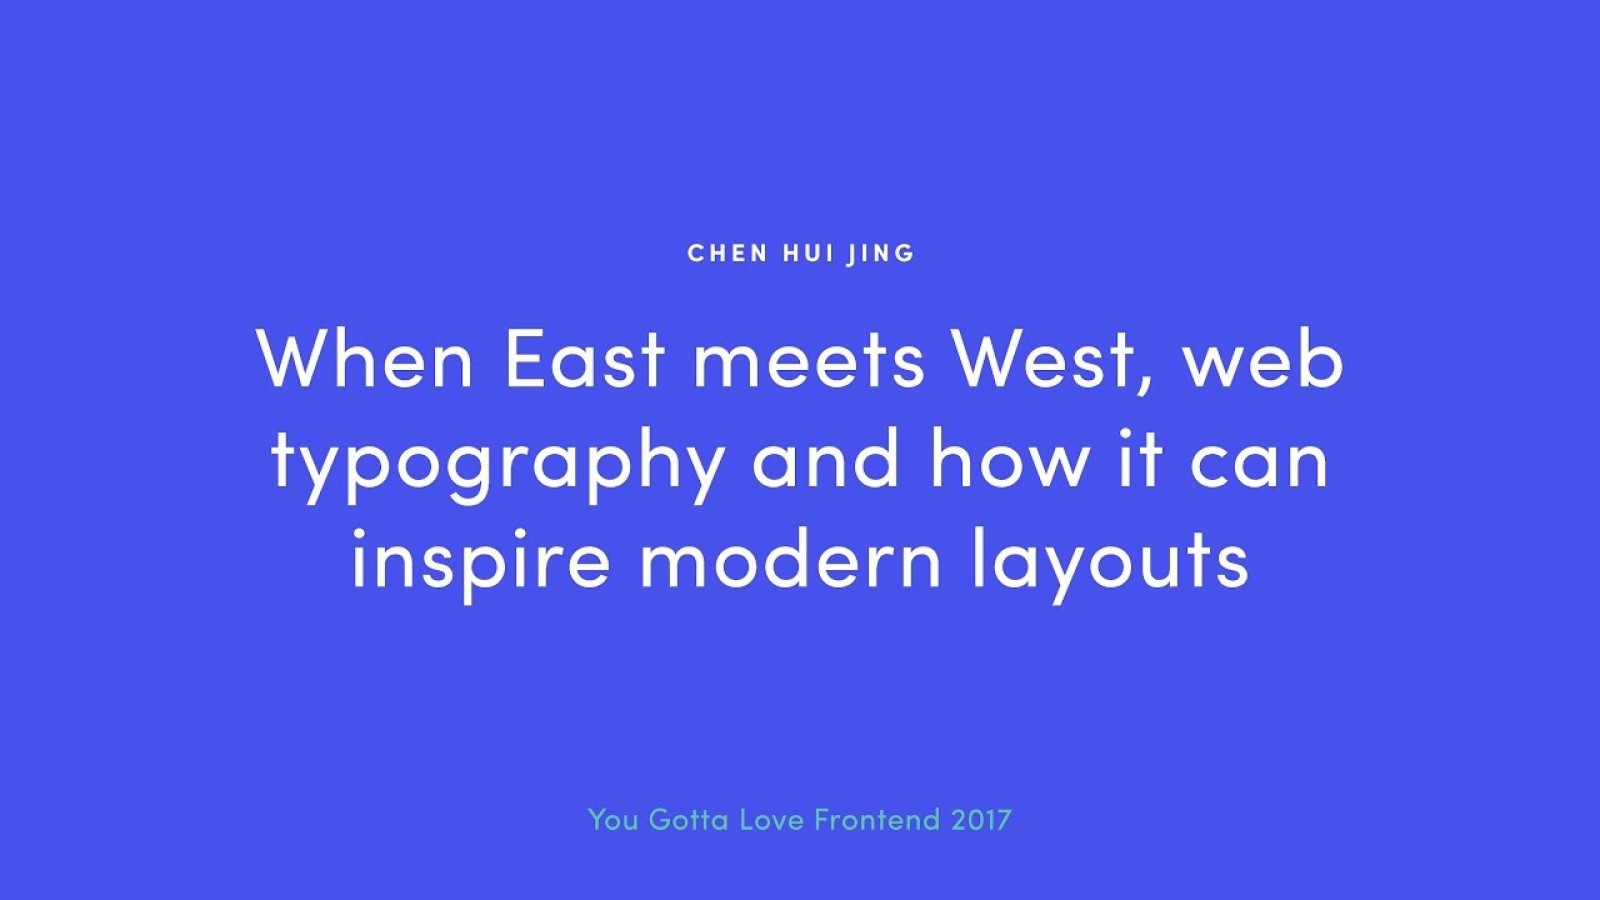 When East meets West: Web typography and how it can inspire modern layouts